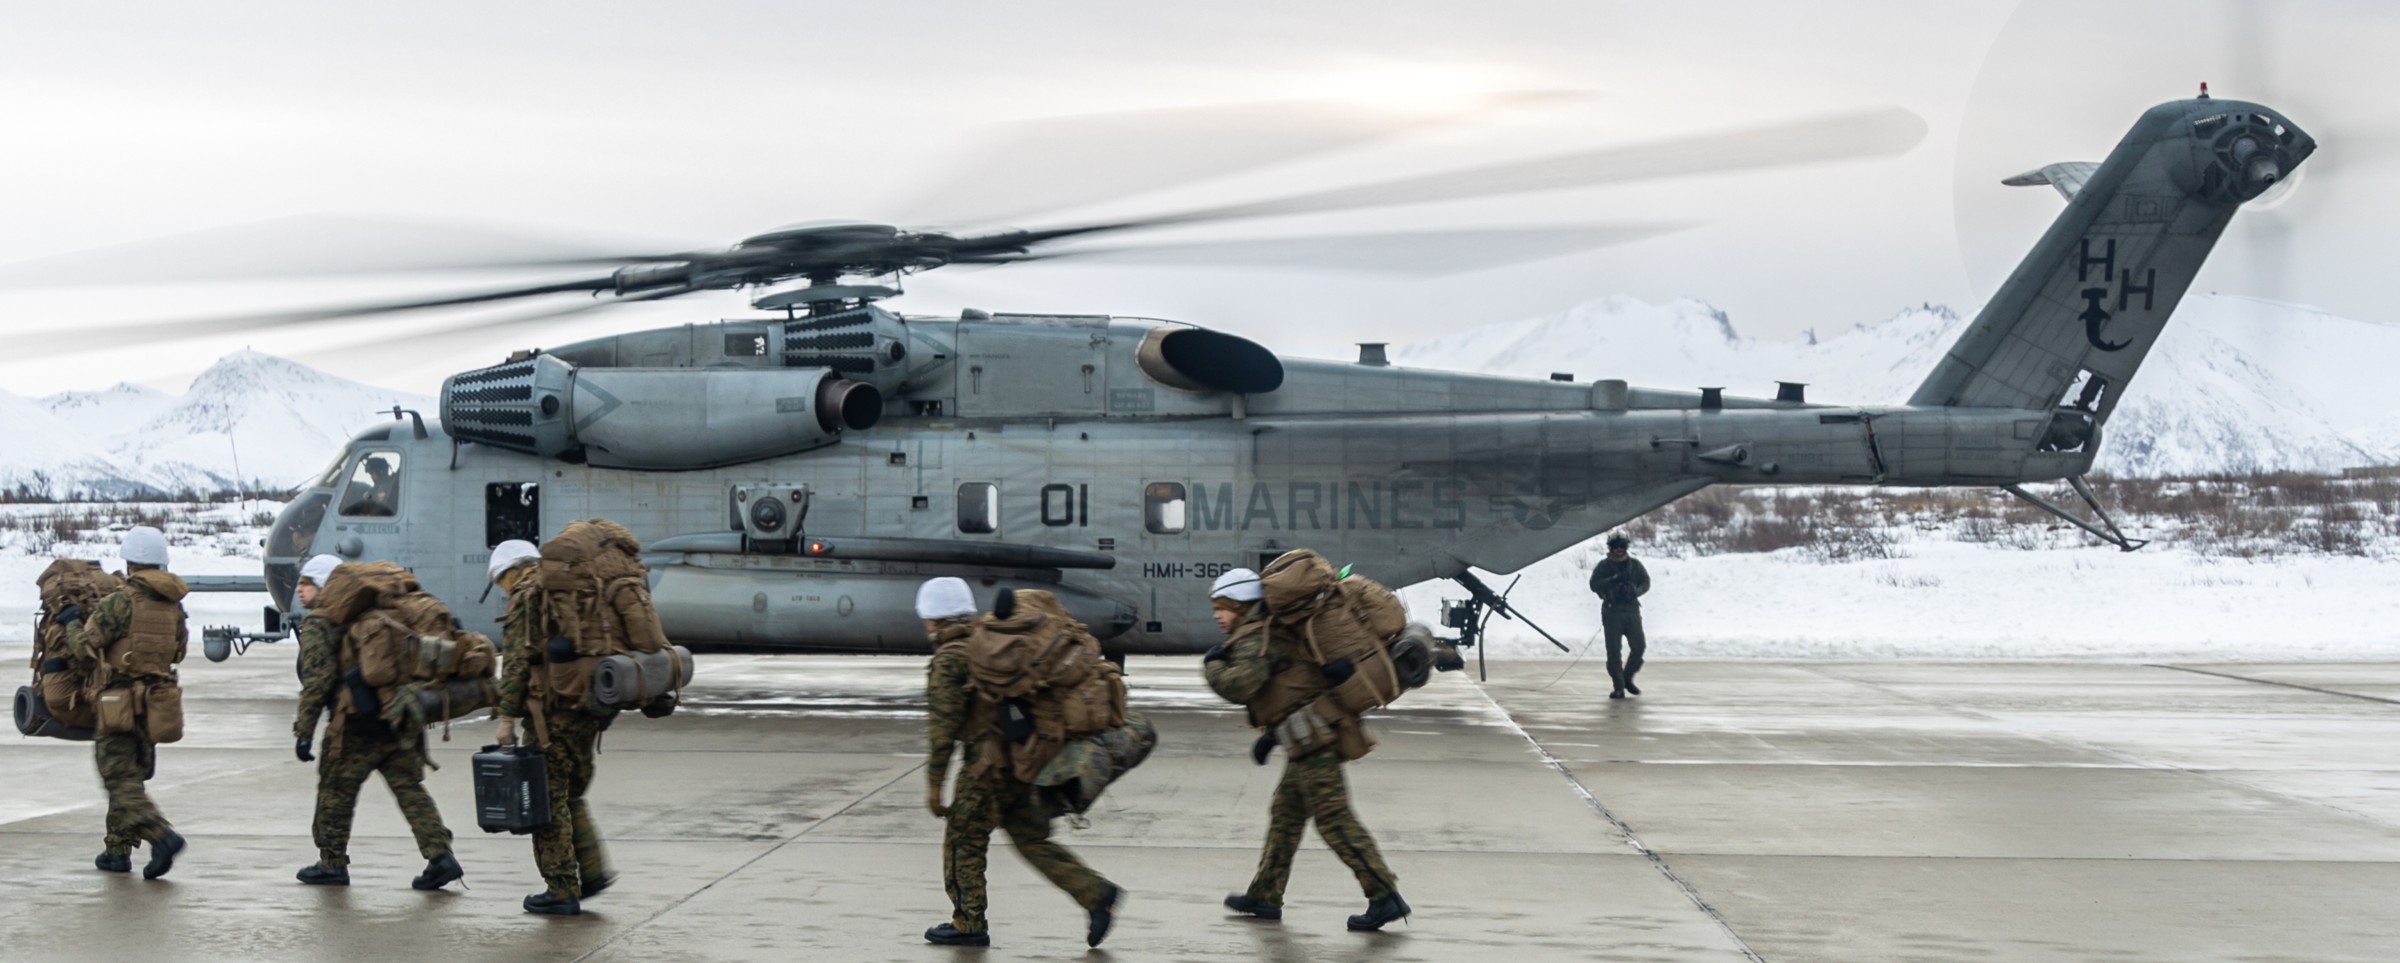 hmh-366 hammerheads ch-53e super stallion marine heavy helicopter squadron exercise cold response bardufoss norway 160 